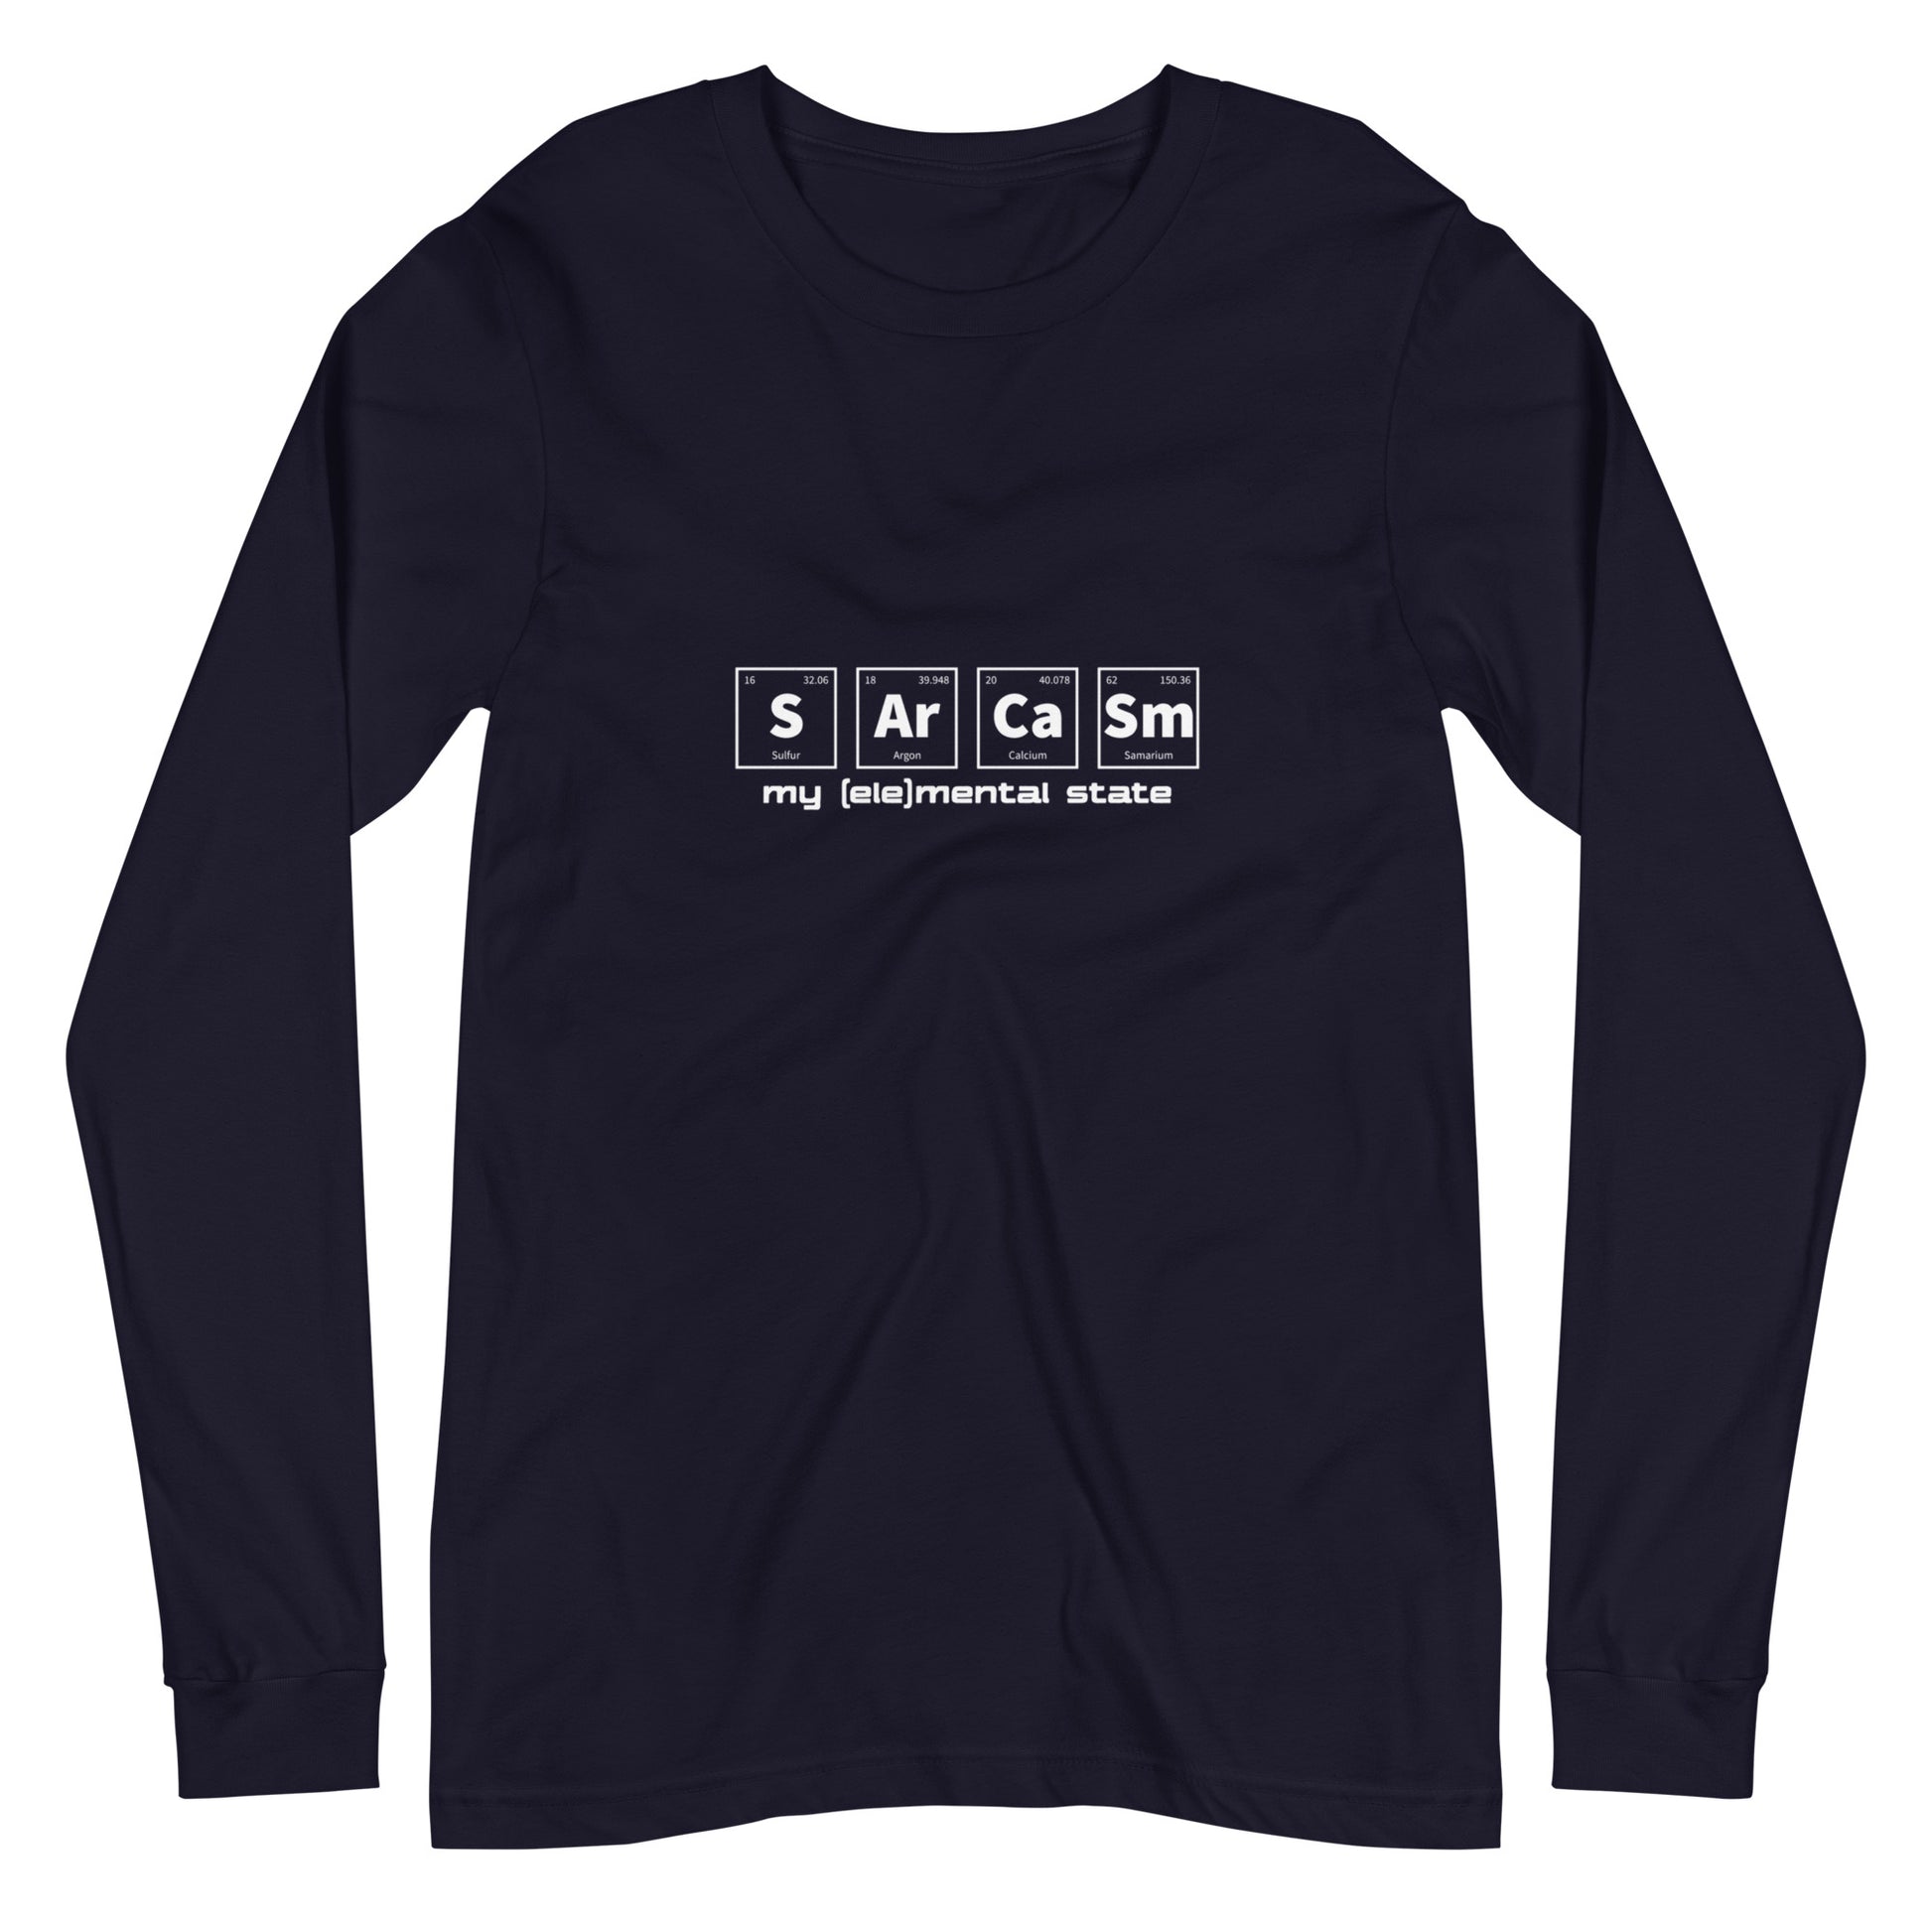 Navy long sleeve t-shirt with graphic of periodic table of elements symbols for Sulfur (S), Argon (Ar), Calcium (Ca), and Samarium (Sm) and text "my (ele)mental state"